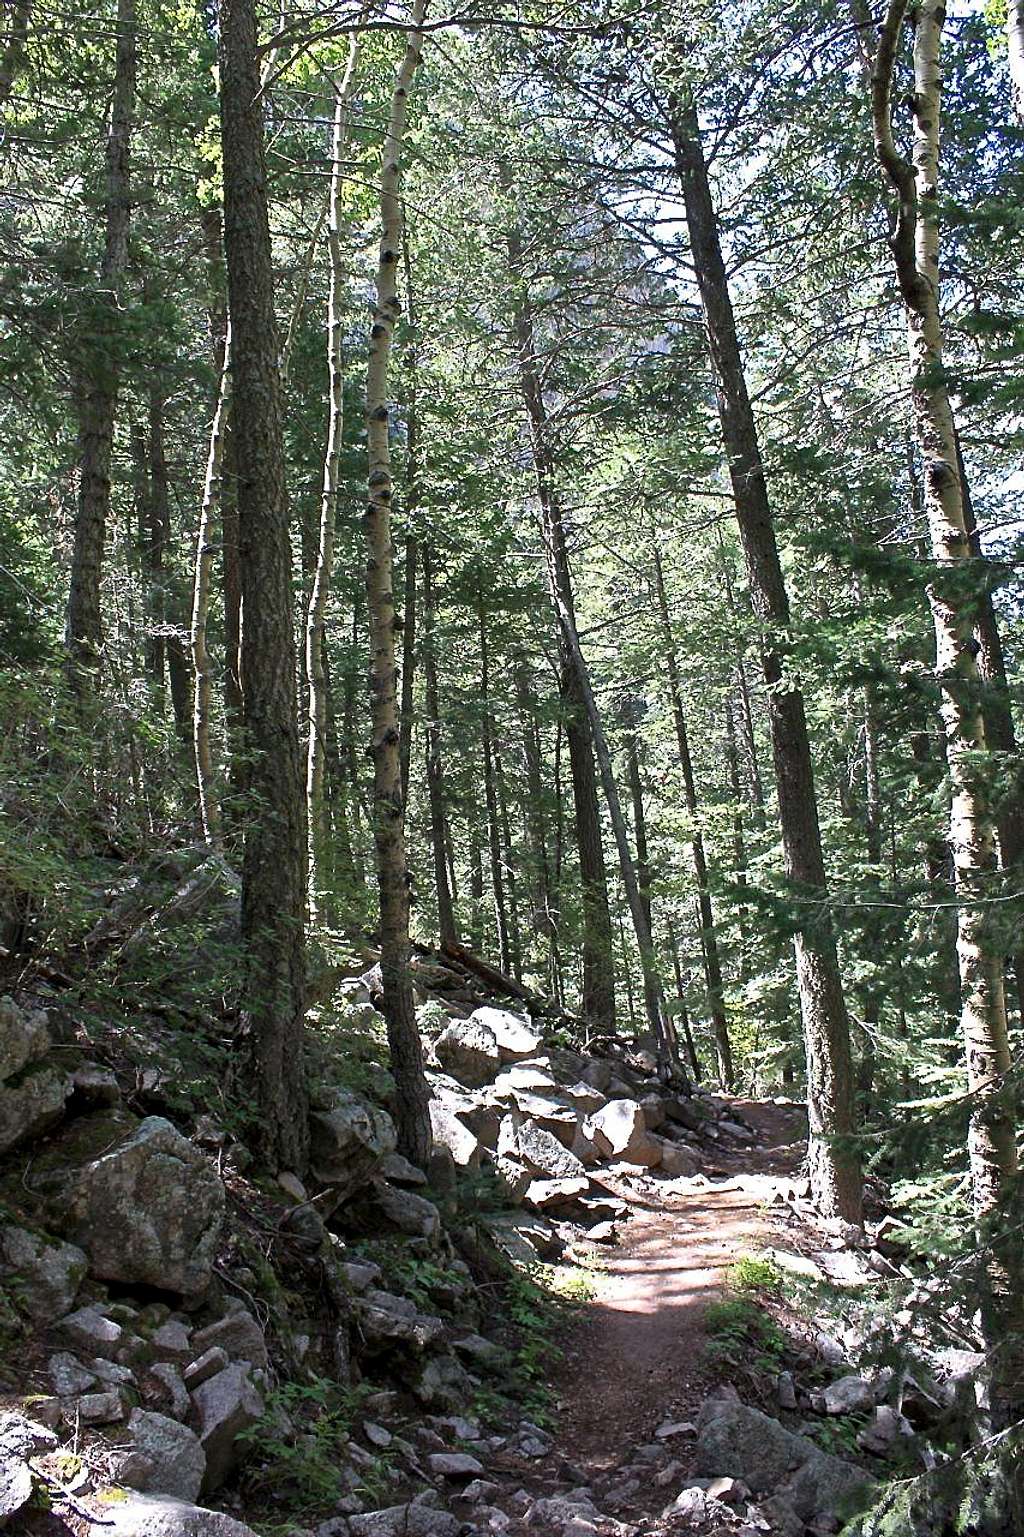 Higher section of the trail